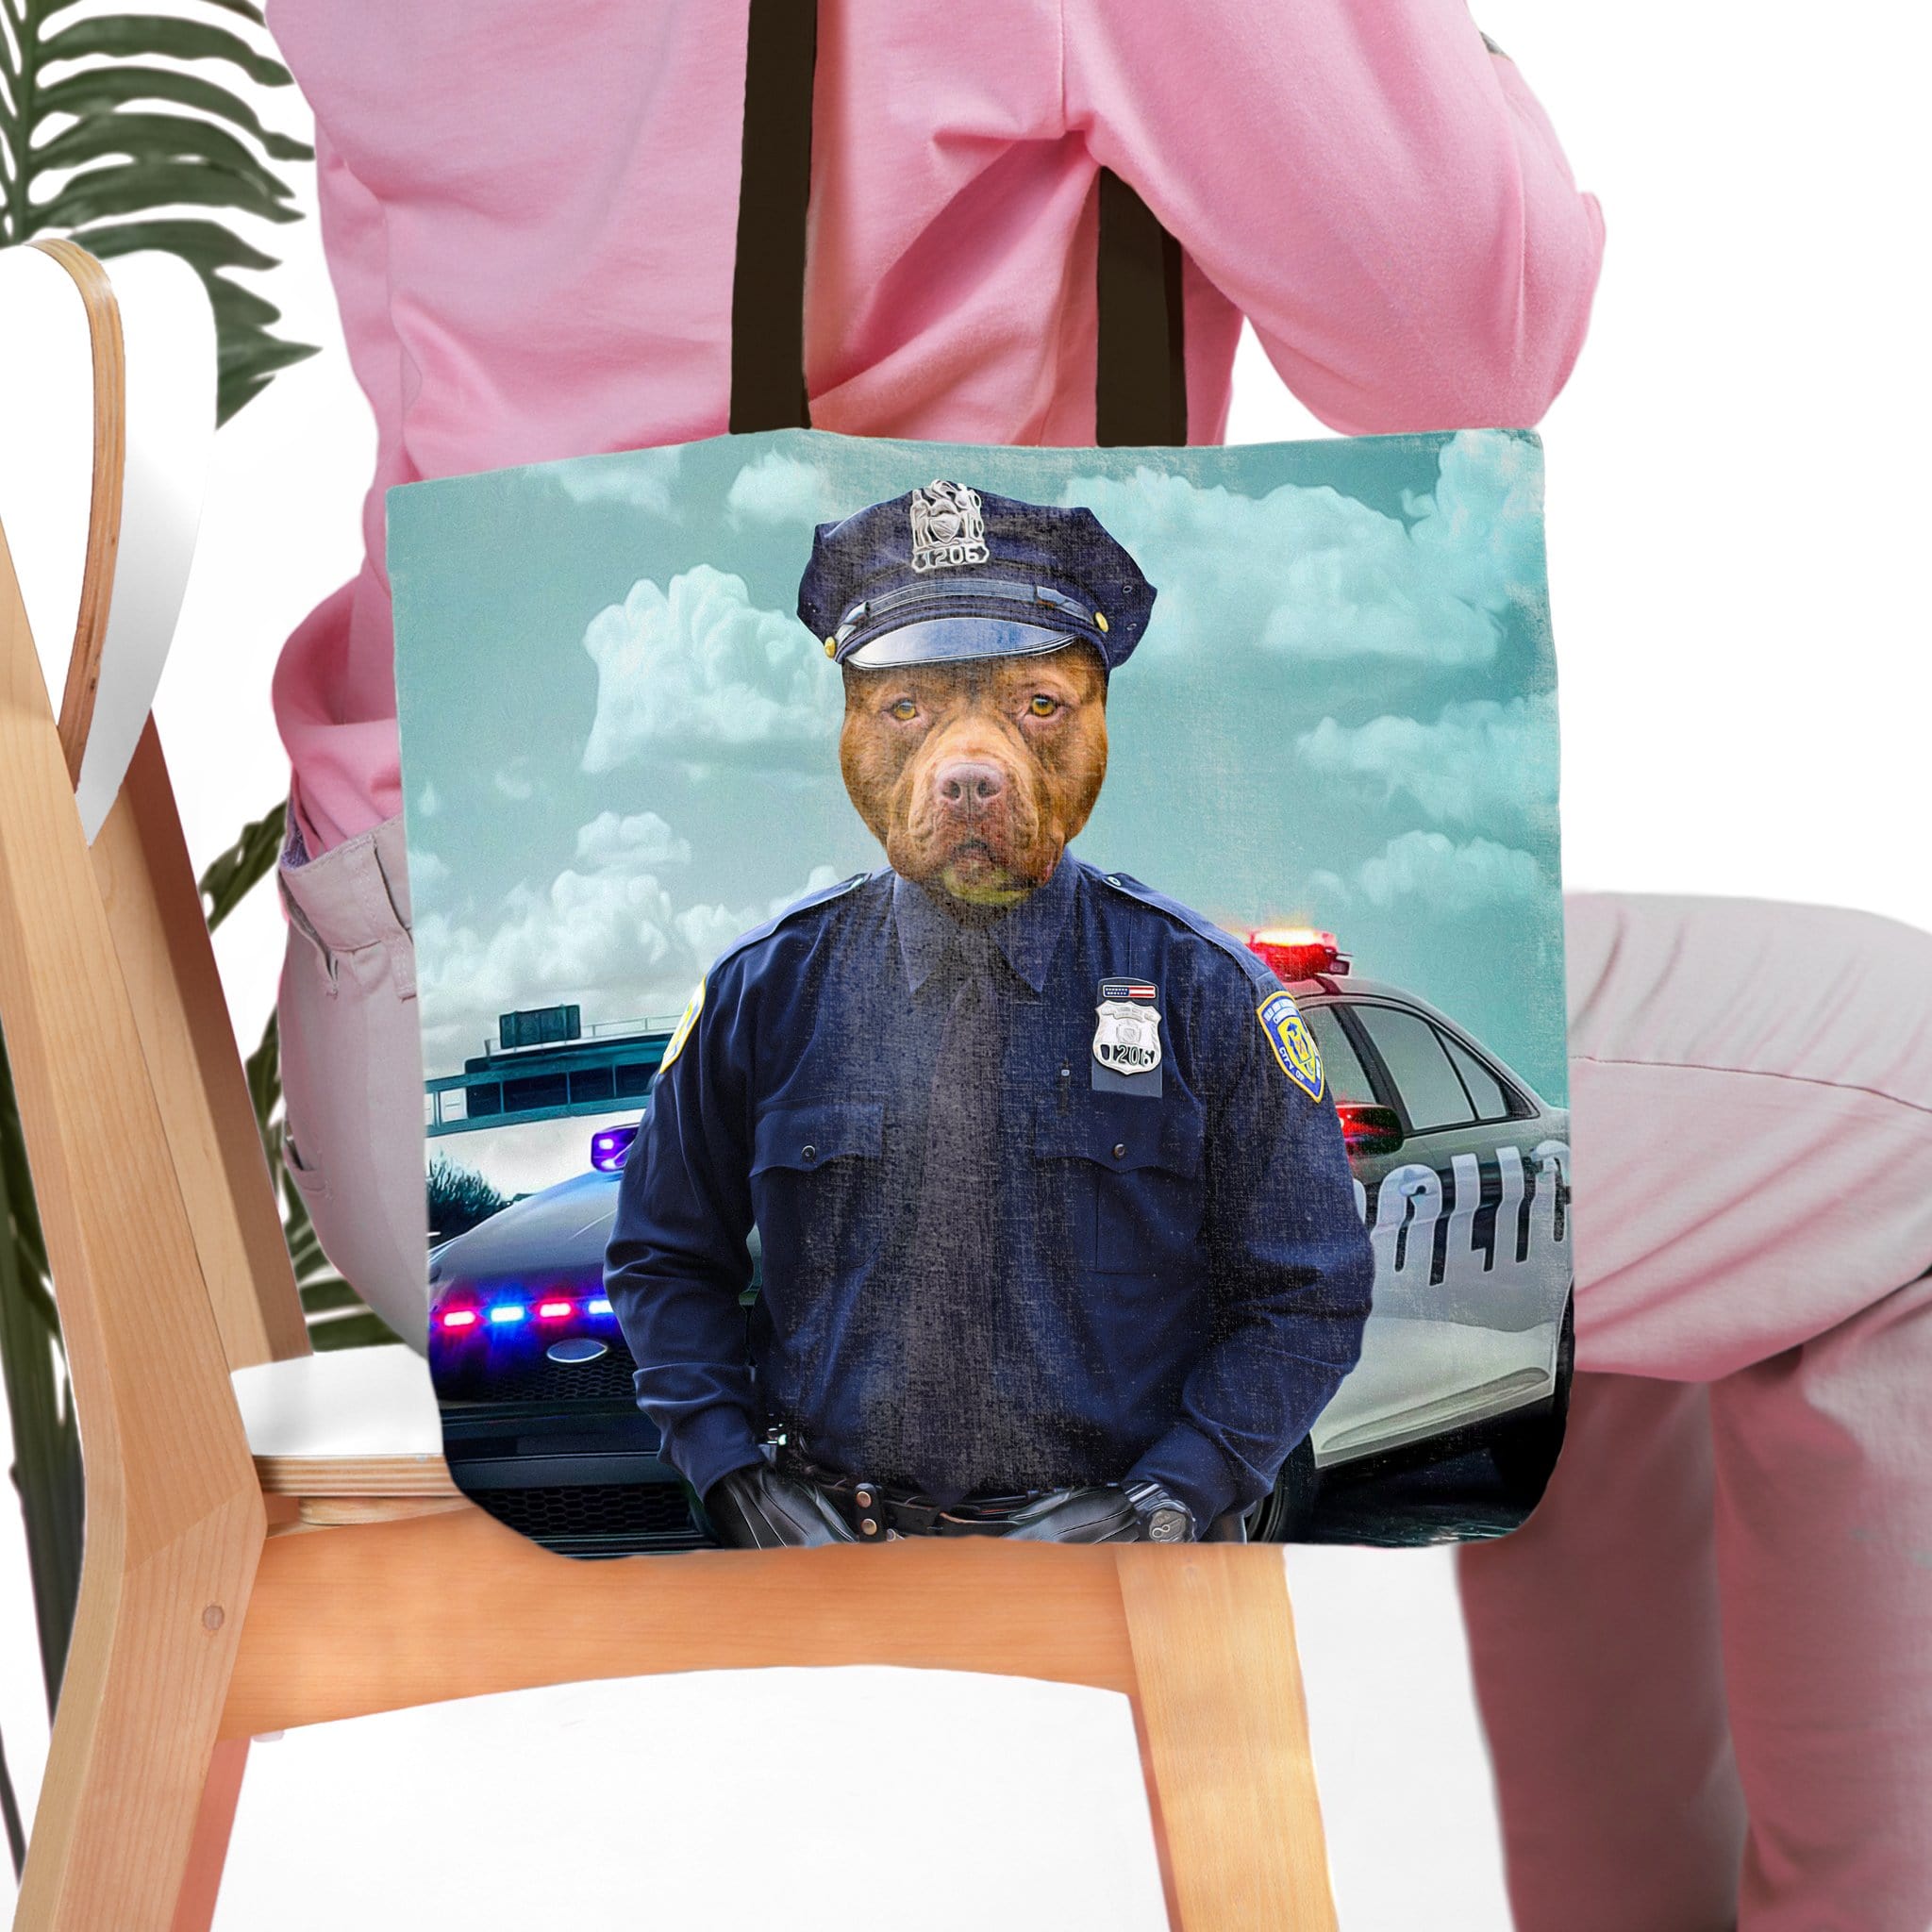 'The Police Officer' Personalized Tote Bag